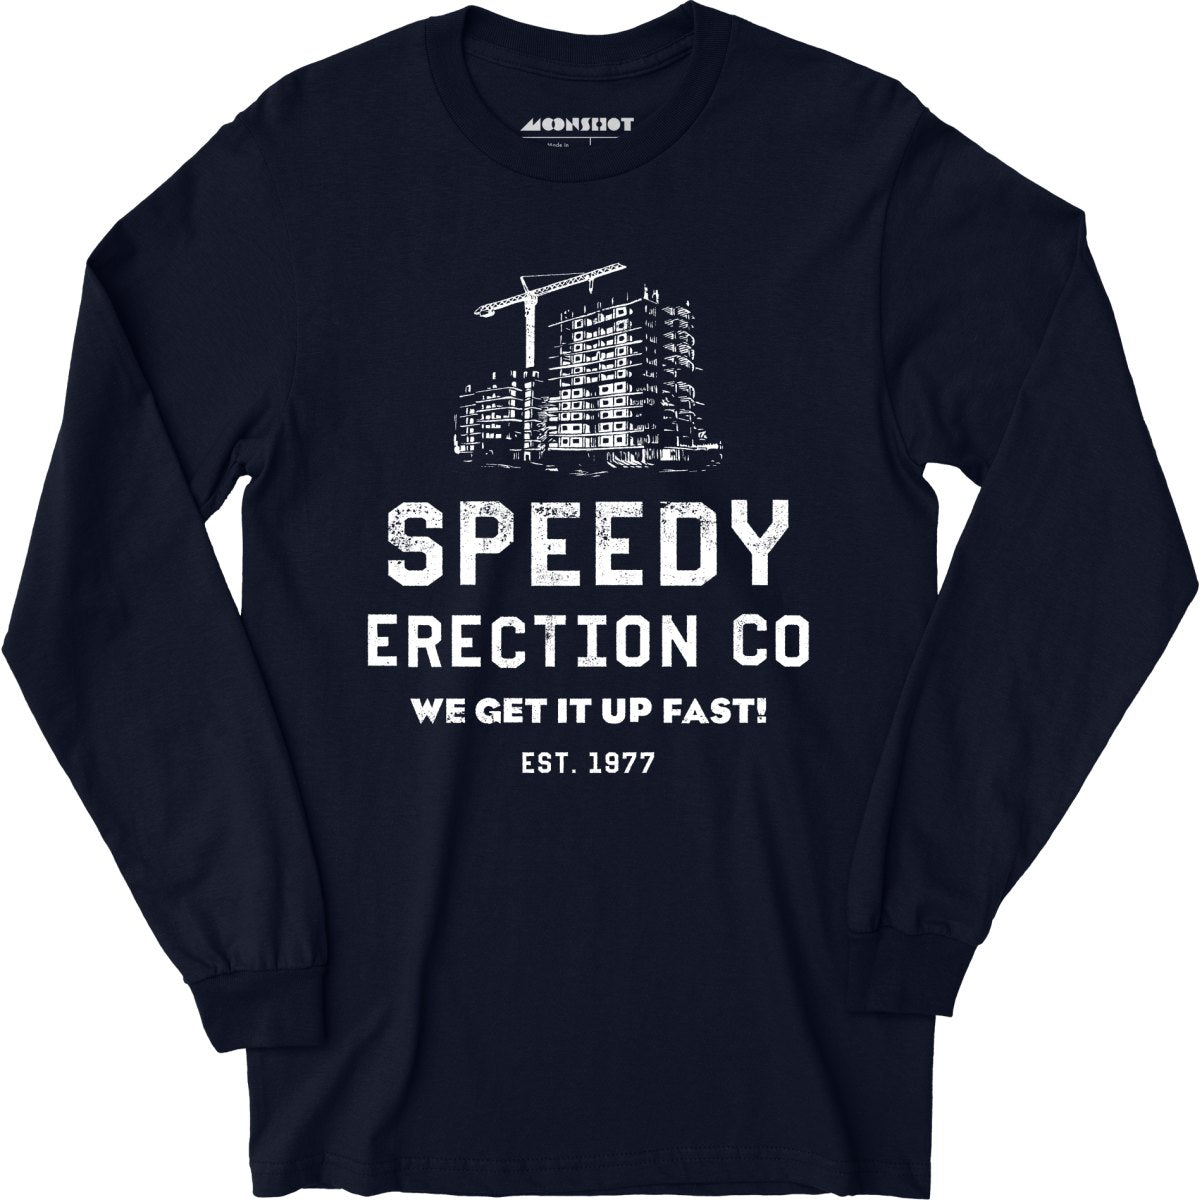 Speedy Erection Co. We Get it Up Fast - Long Sleeve T-Shirt